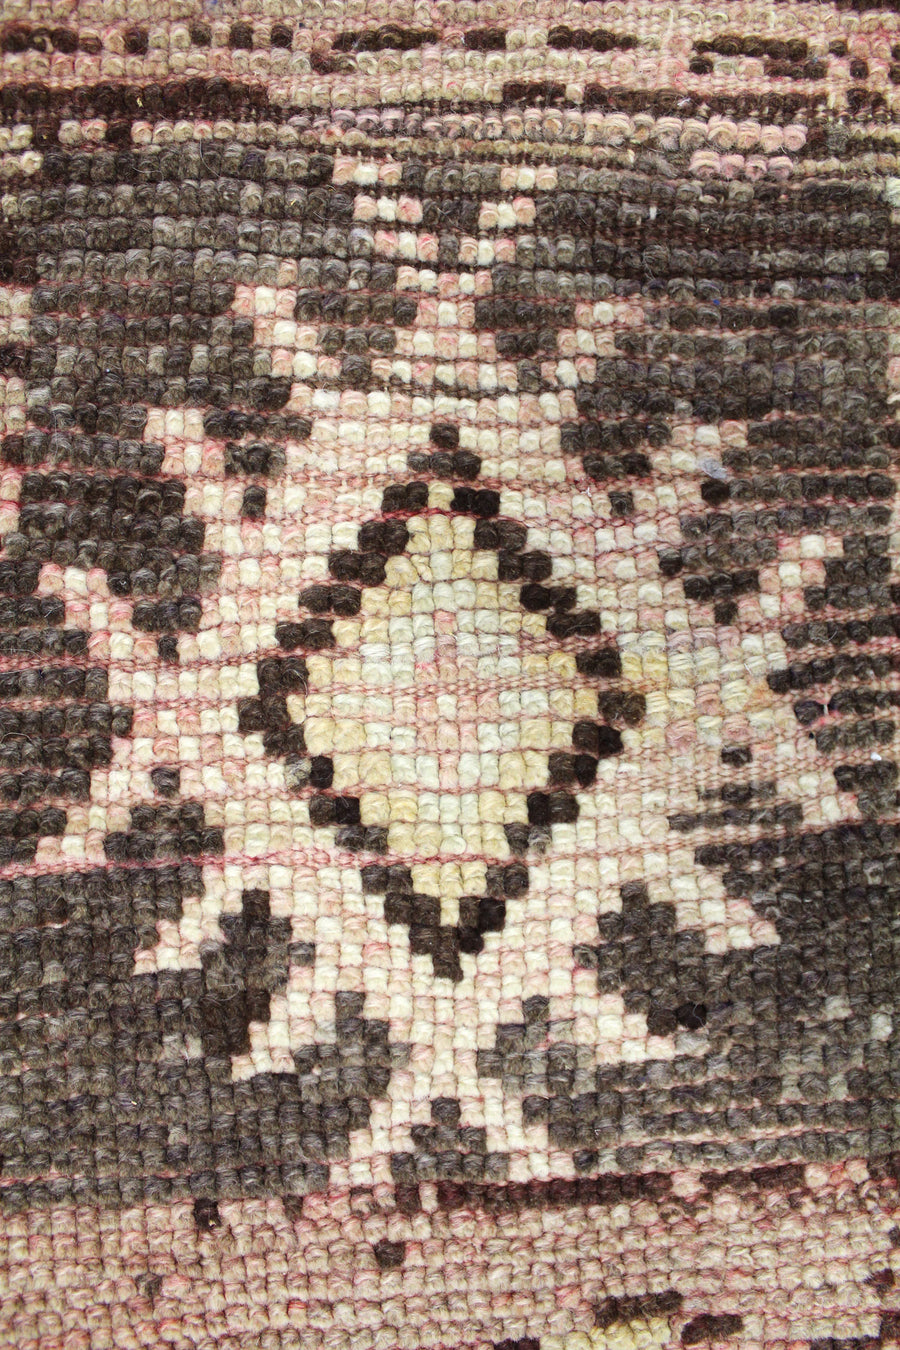 MOROCCAN HANDKNOTTED RUG, 61917